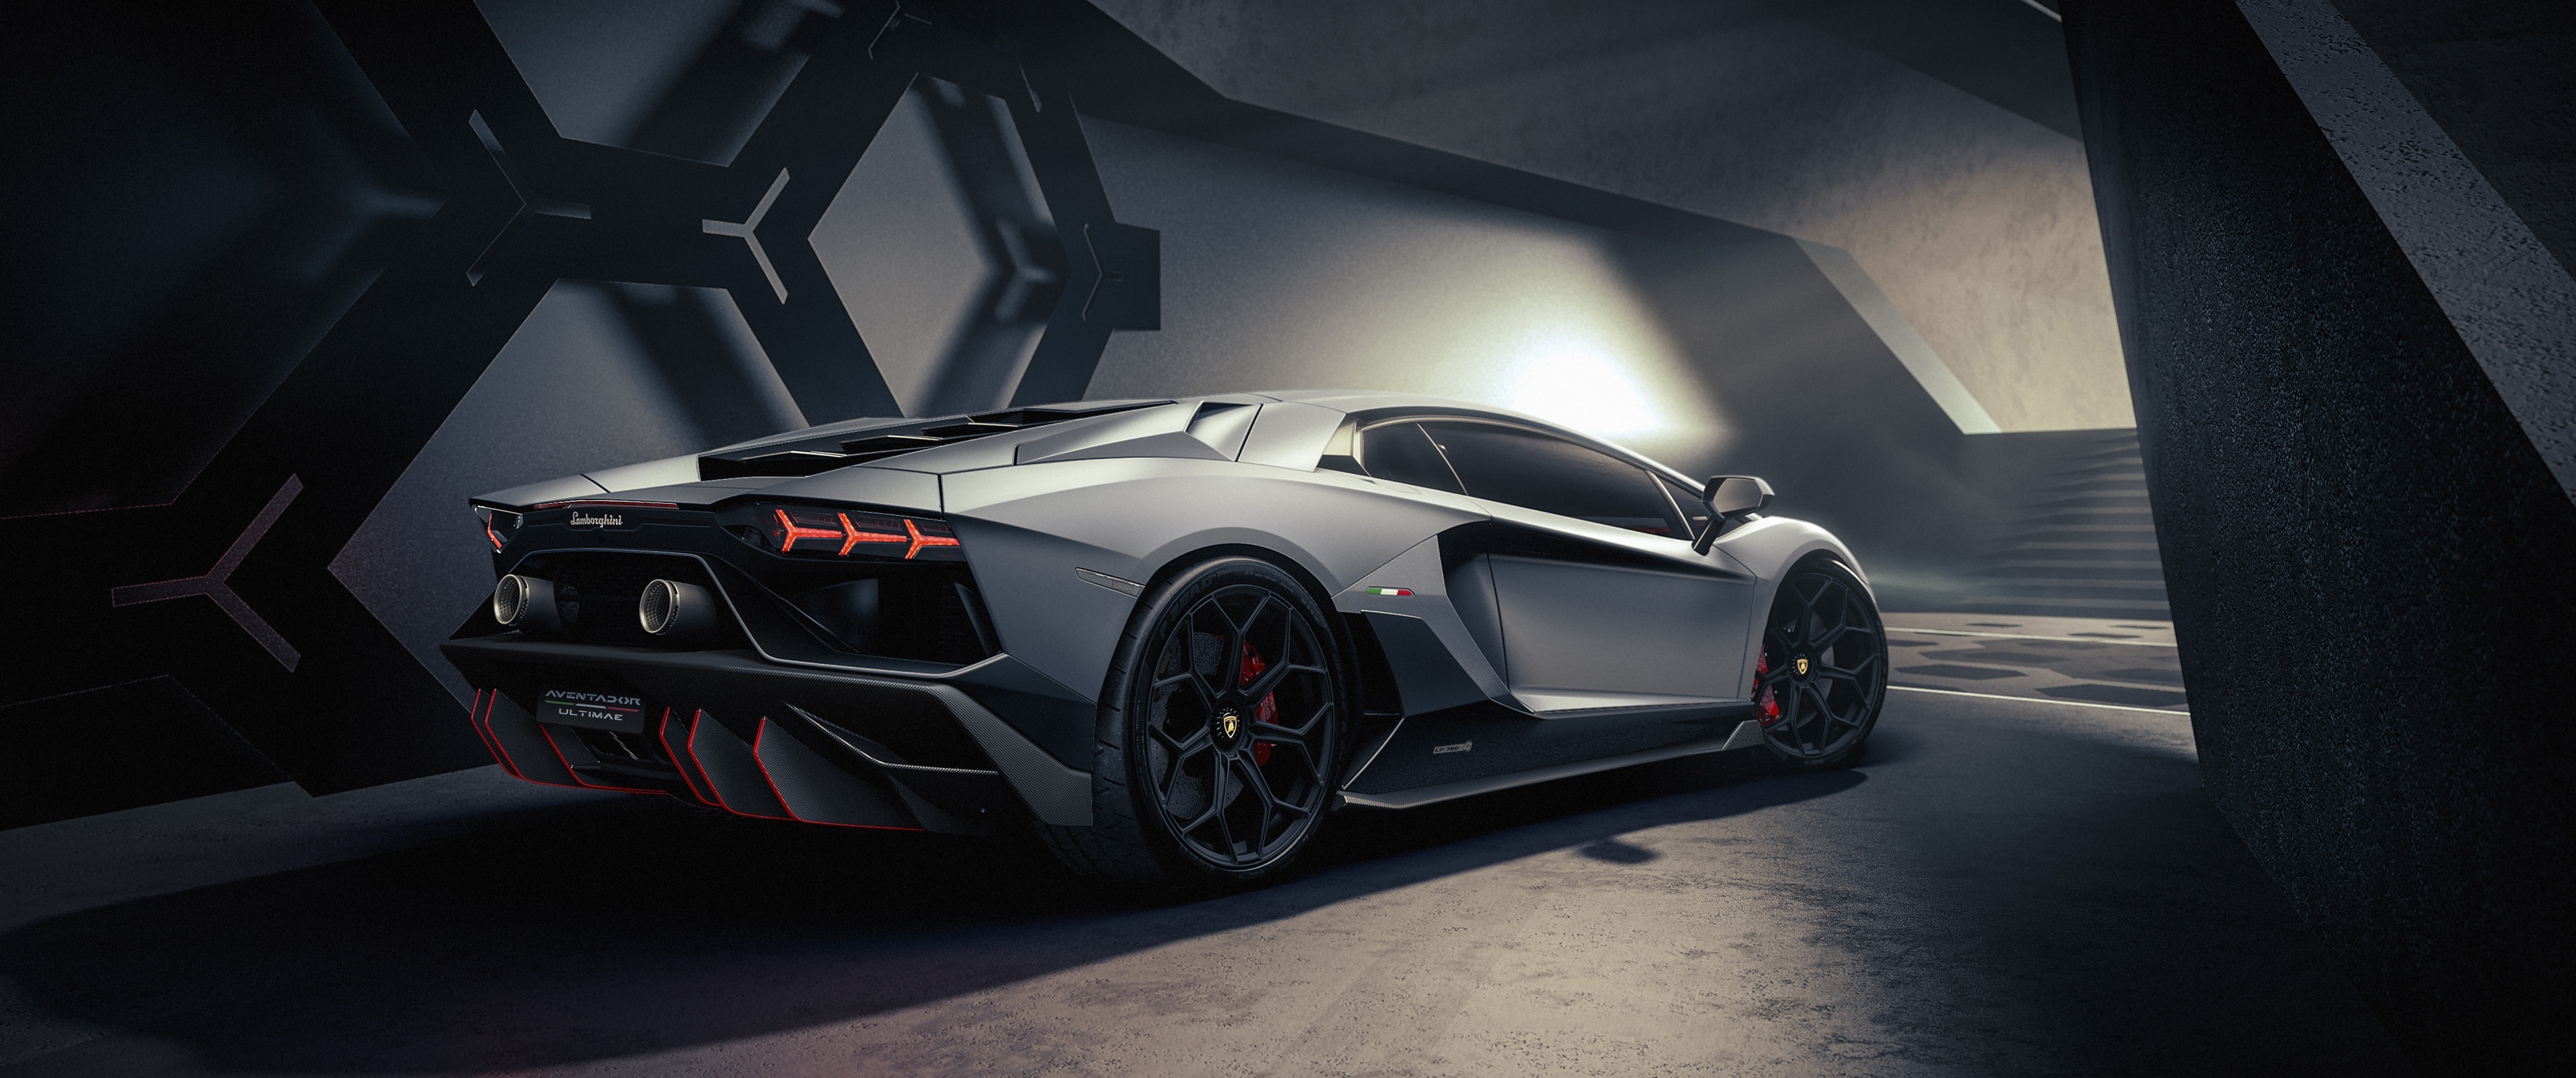 Lamborghini Aventador, Dark and powerful, Supercharged performance, Unmatched speed, 3440x1440 Dual Screen Desktop